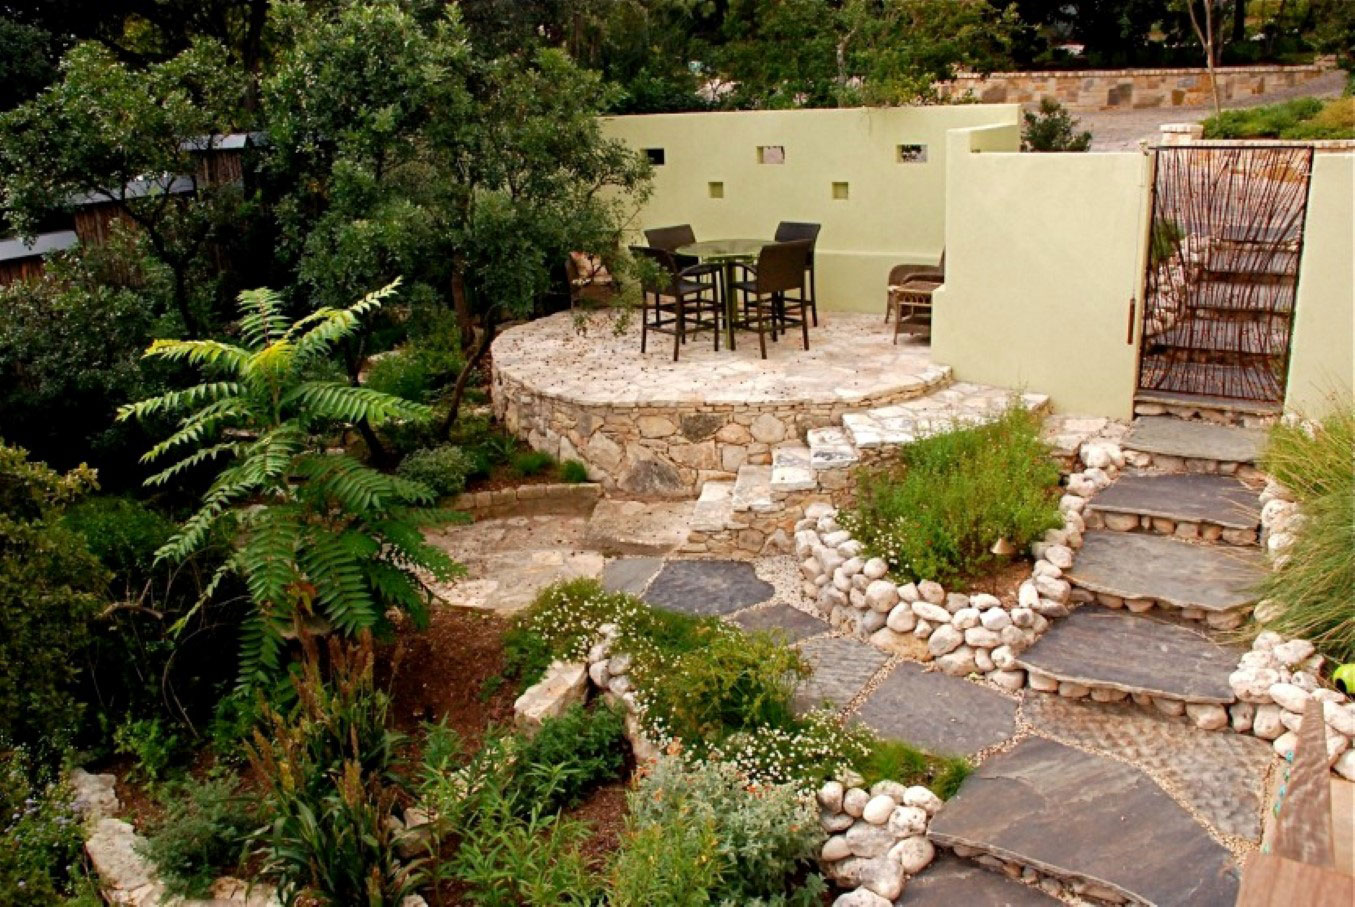 Patio Idea Stone Backyard Patio Idea Present Beautiful Stone Walkway And Stairs Feat Cozy Black Outdoor Furniture Set Design Backyard  Decorating Backyard Patio Ideas For Lovely Family And Enhancing Your House Design 